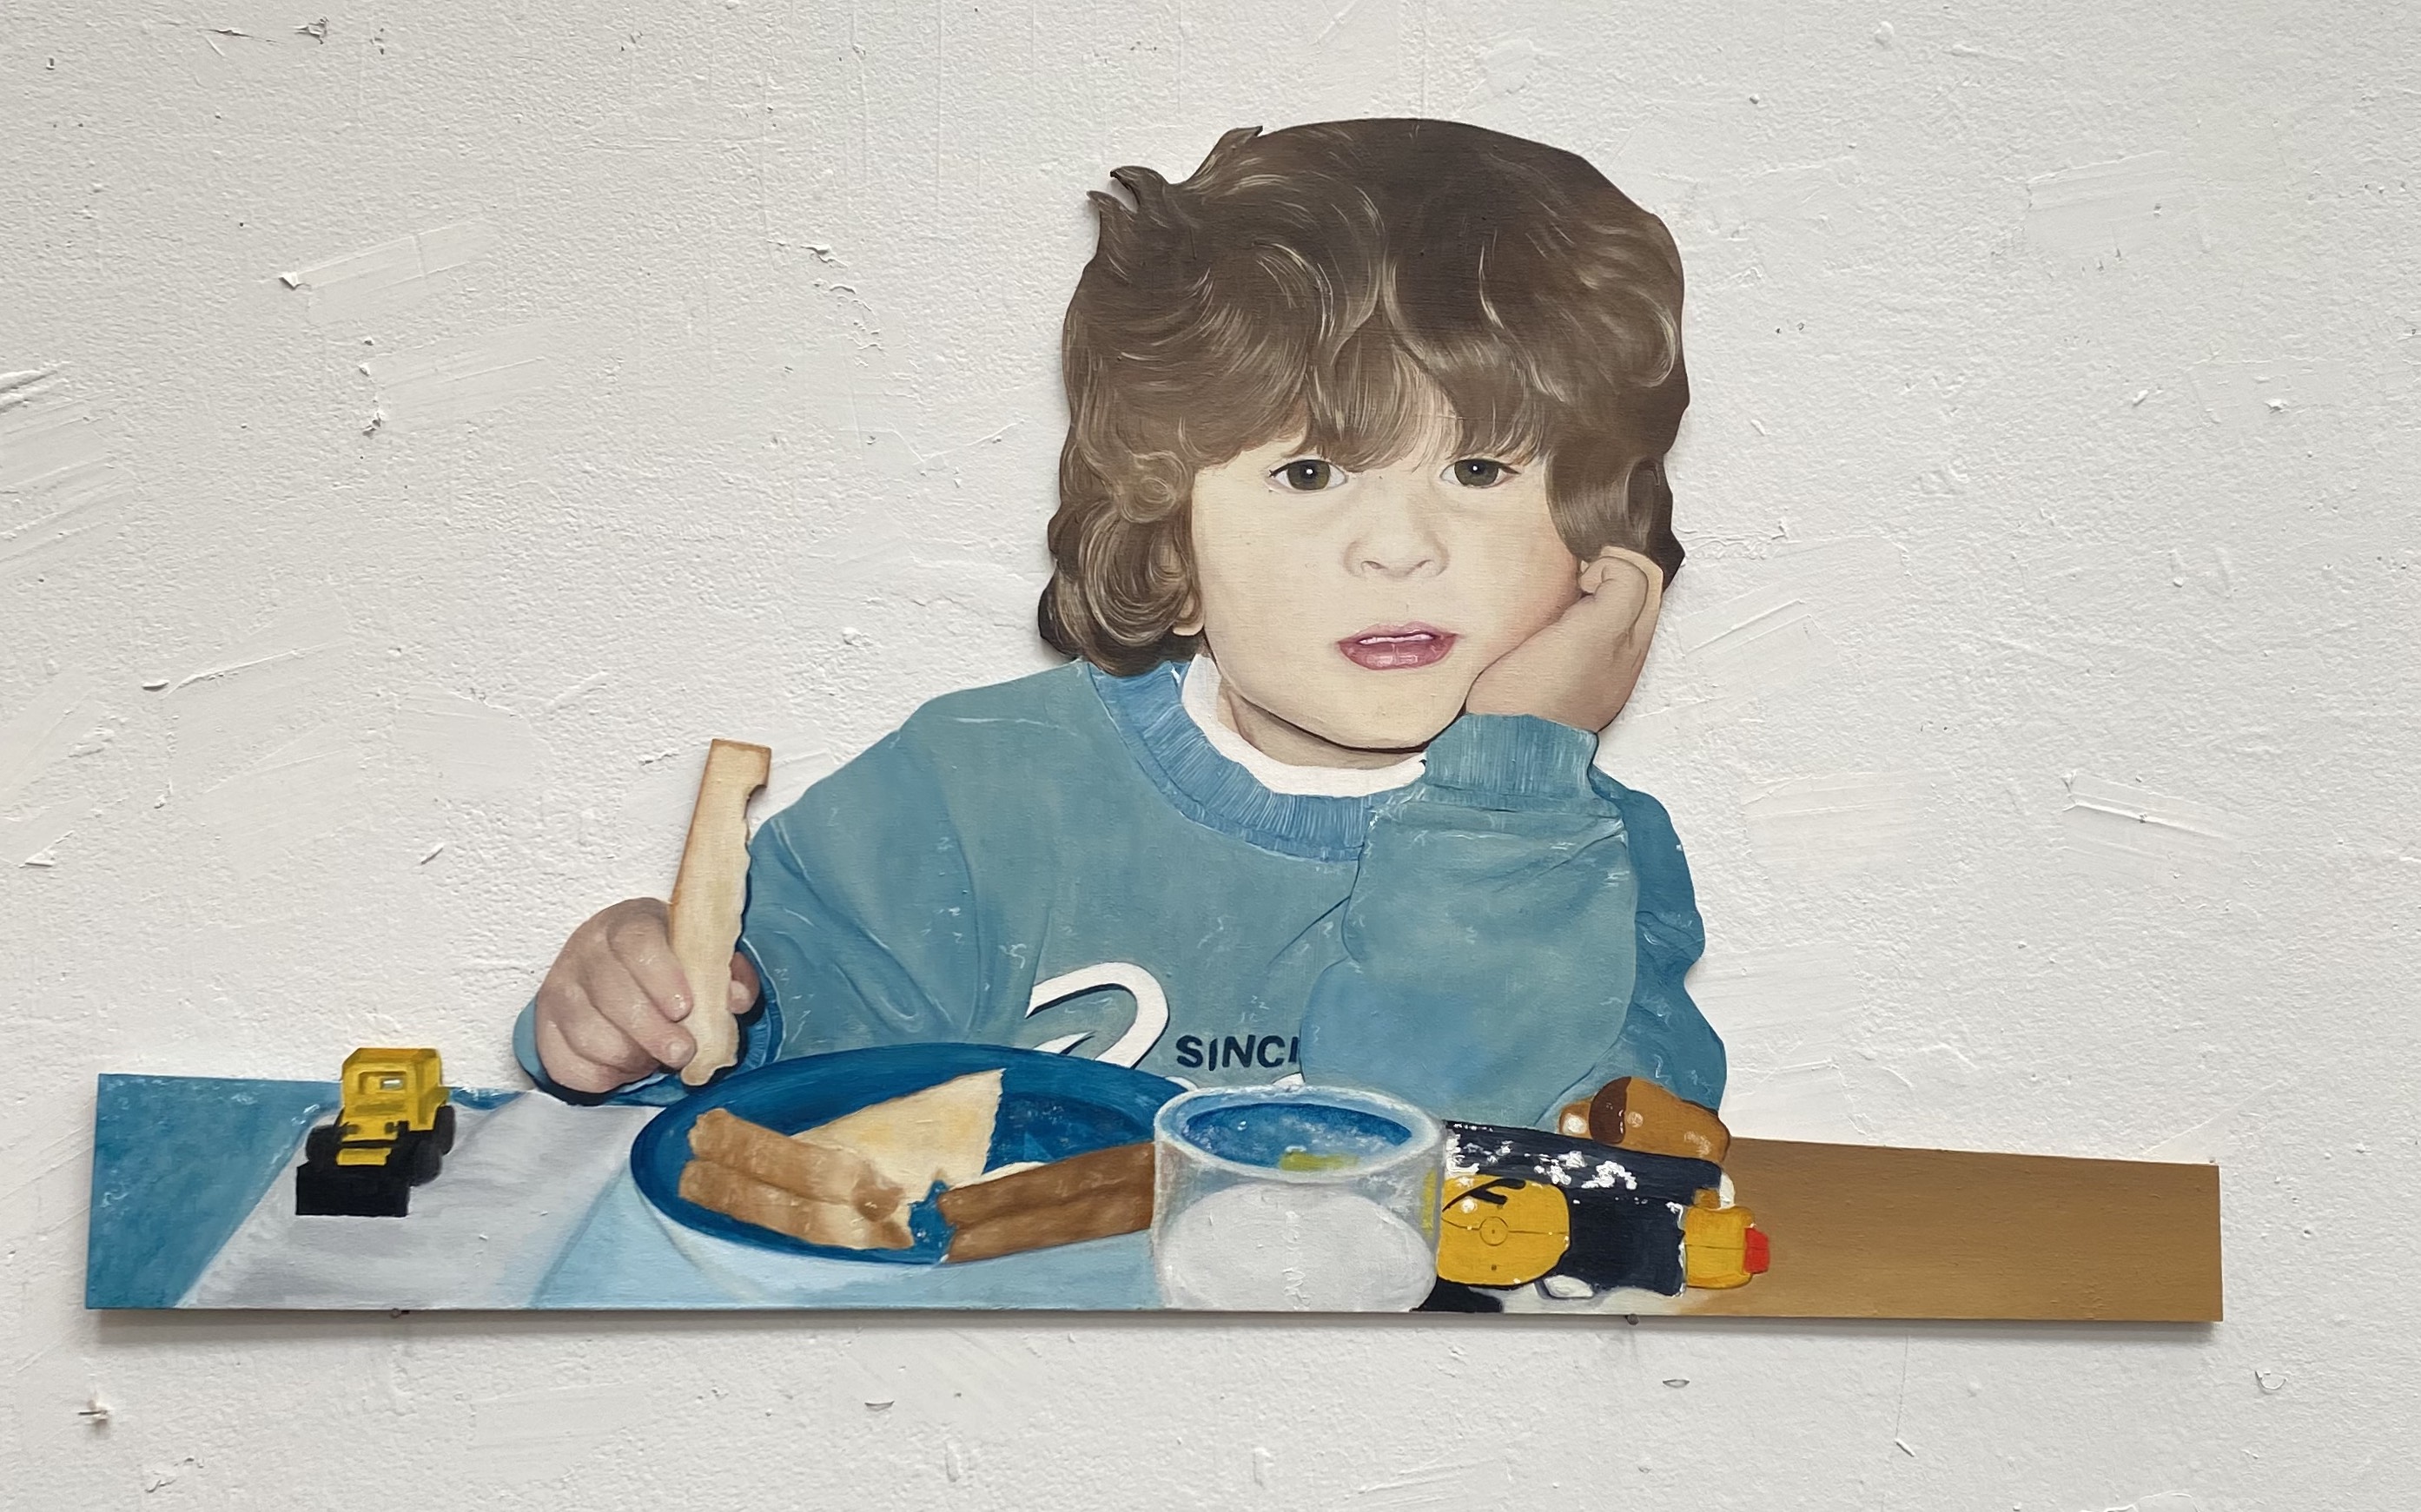 Moms Lunches, 2022, Oil Paint on Wood, 22" x 38"